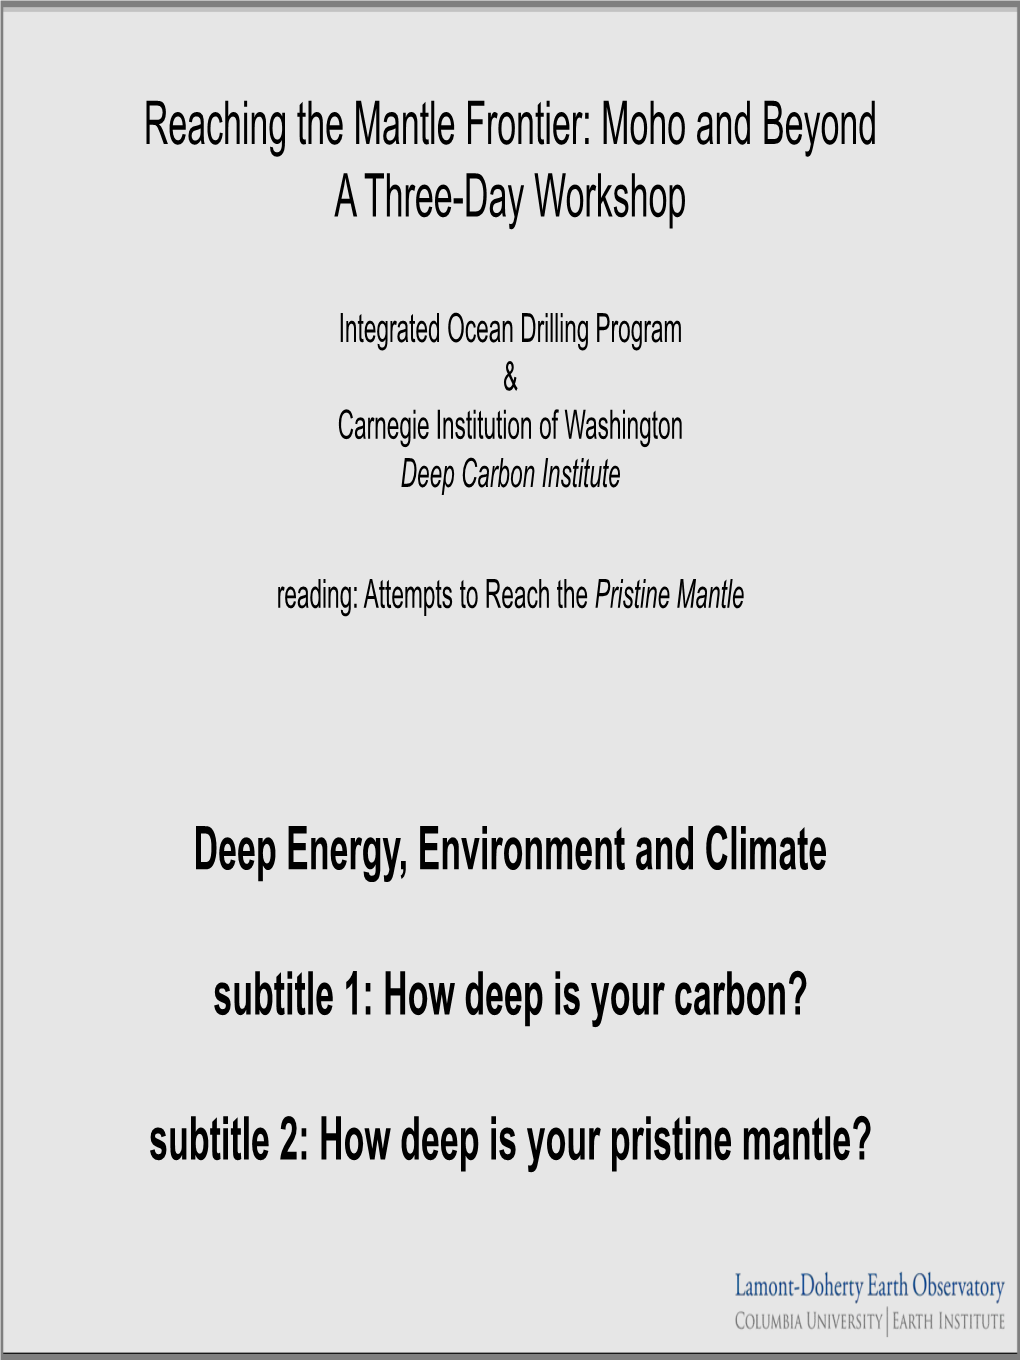 Deep Energy, Environment and Climate Subtitle 1